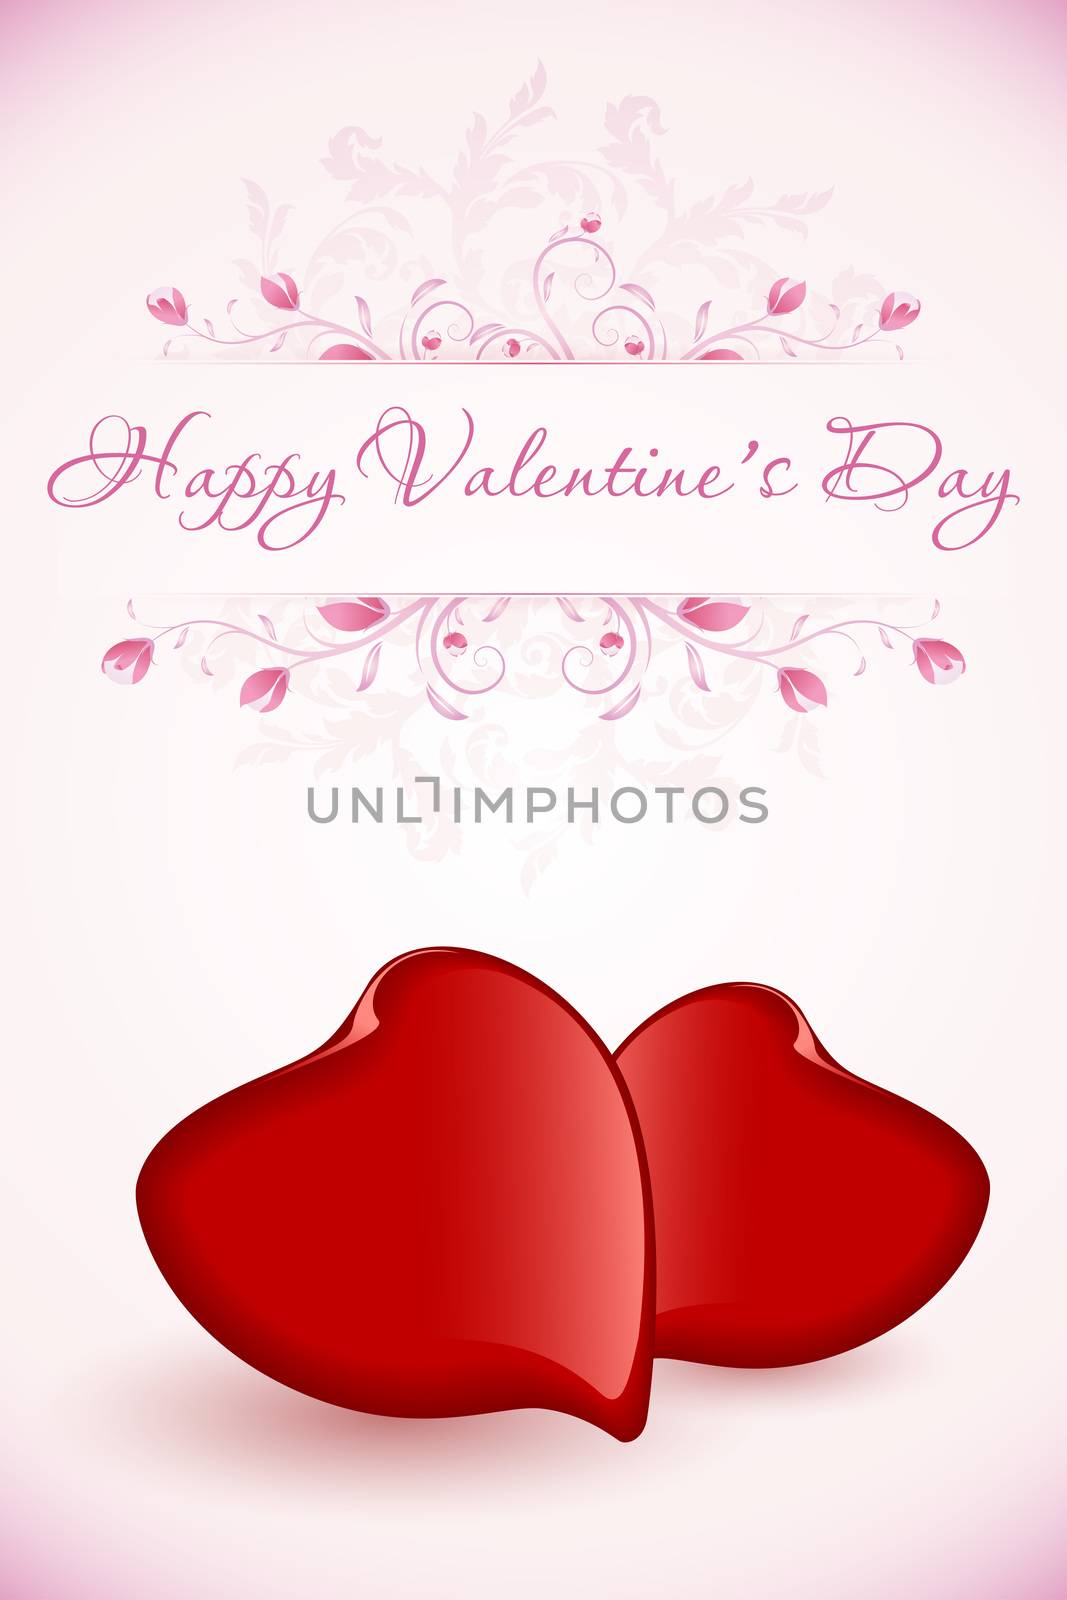 Happy Valentine's Day Floral Card - Typographical Background with Two Hearts                                               